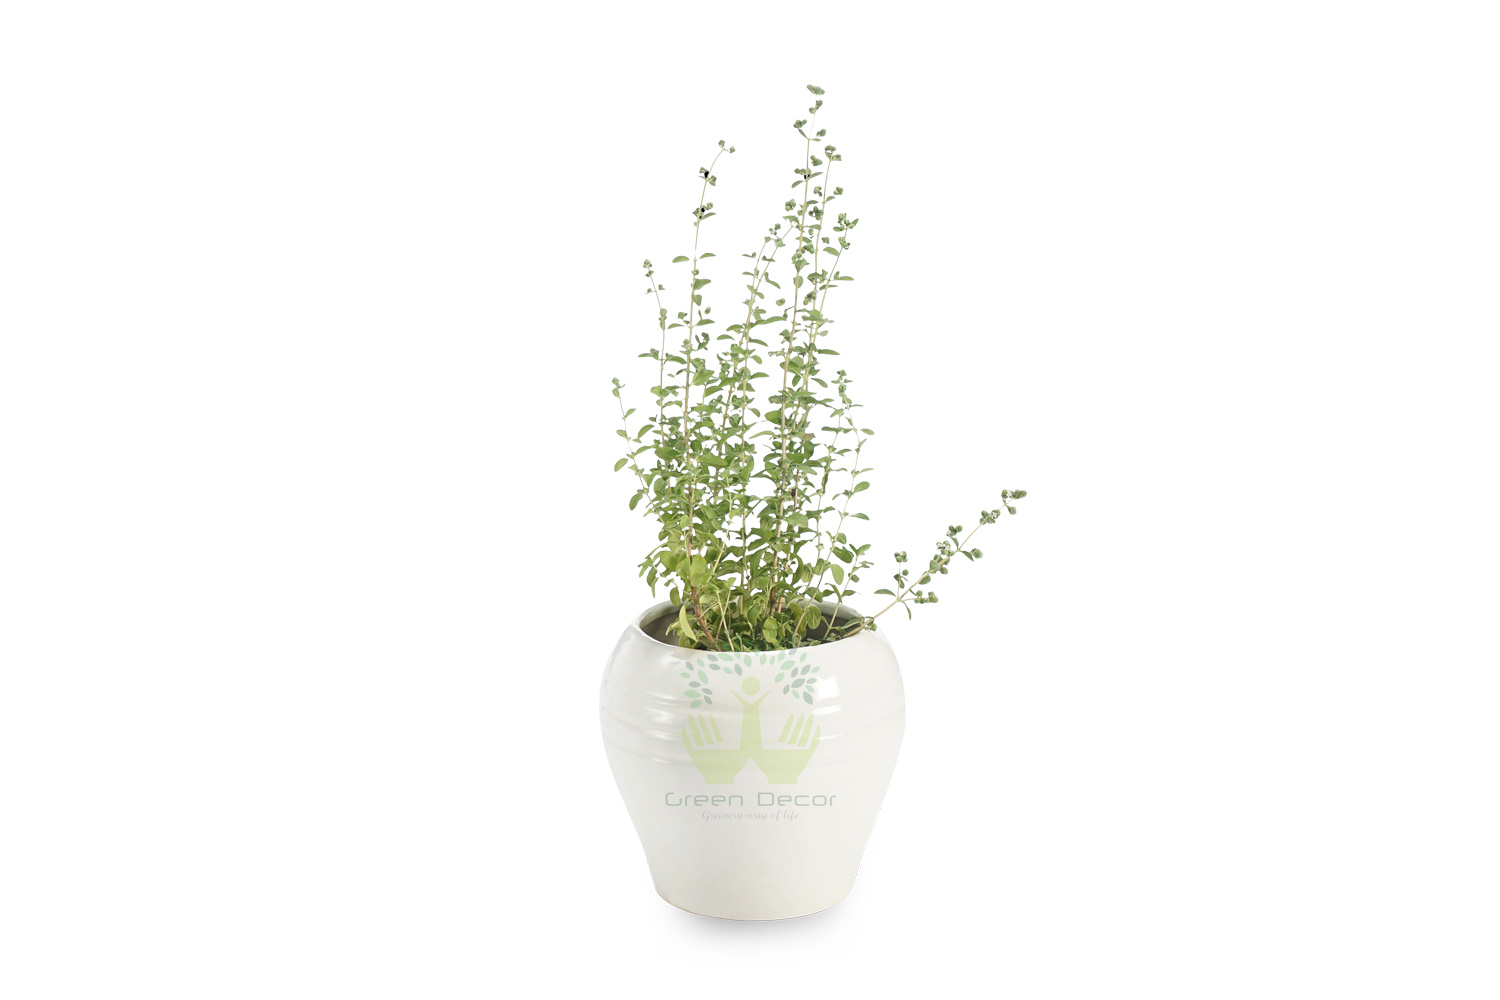 Buy Oregano Plants , White Pots and seeds in Delhi NCR by the best online nursery shop Greendecor.